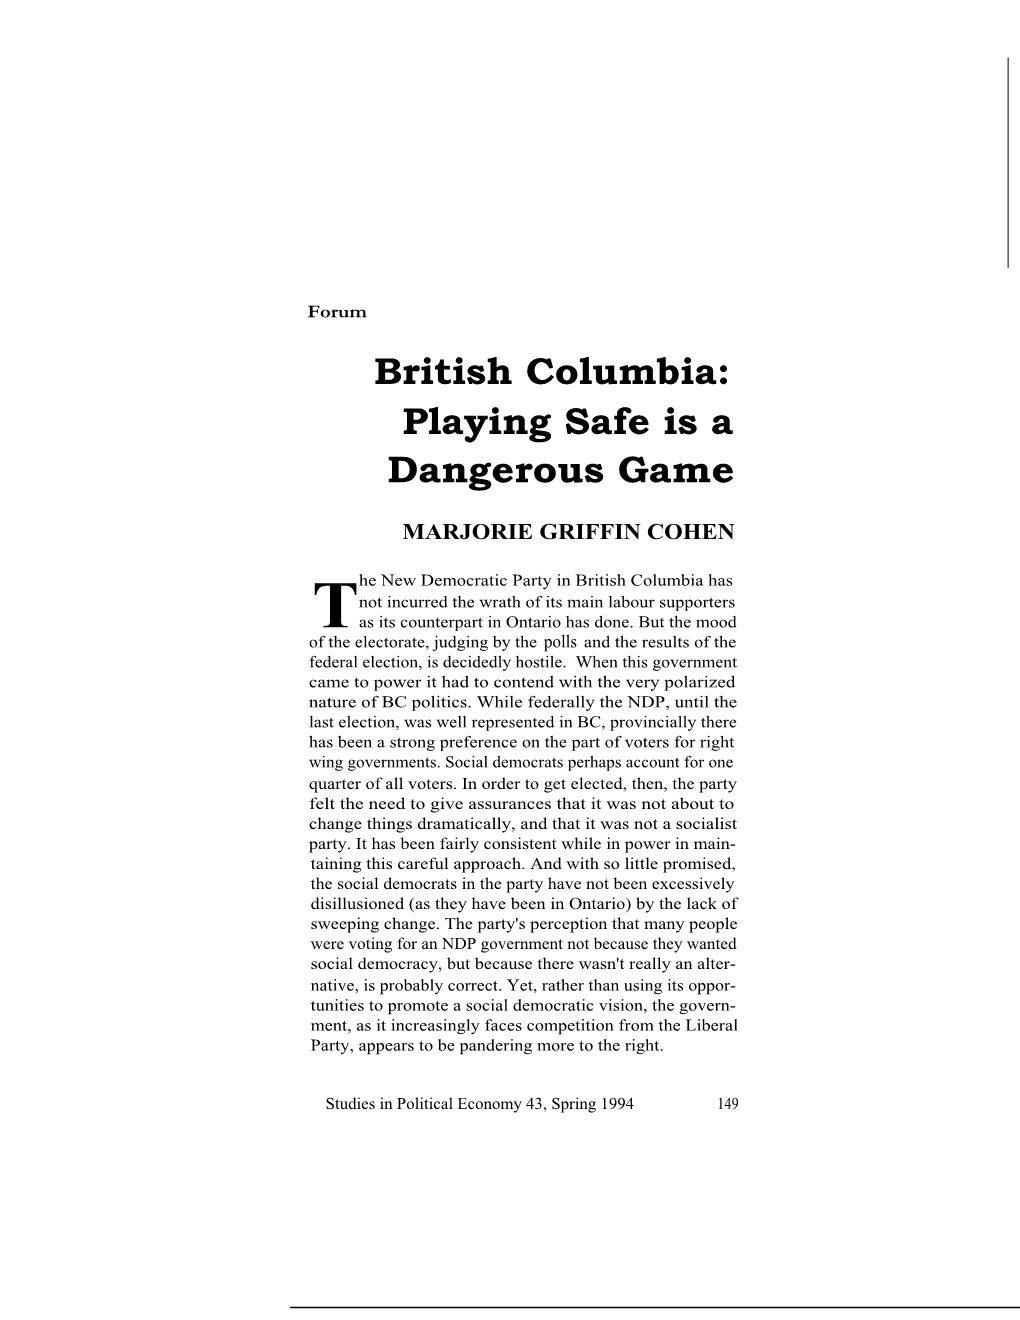 British Columbia: Playing Safe Is a Dangerous Game